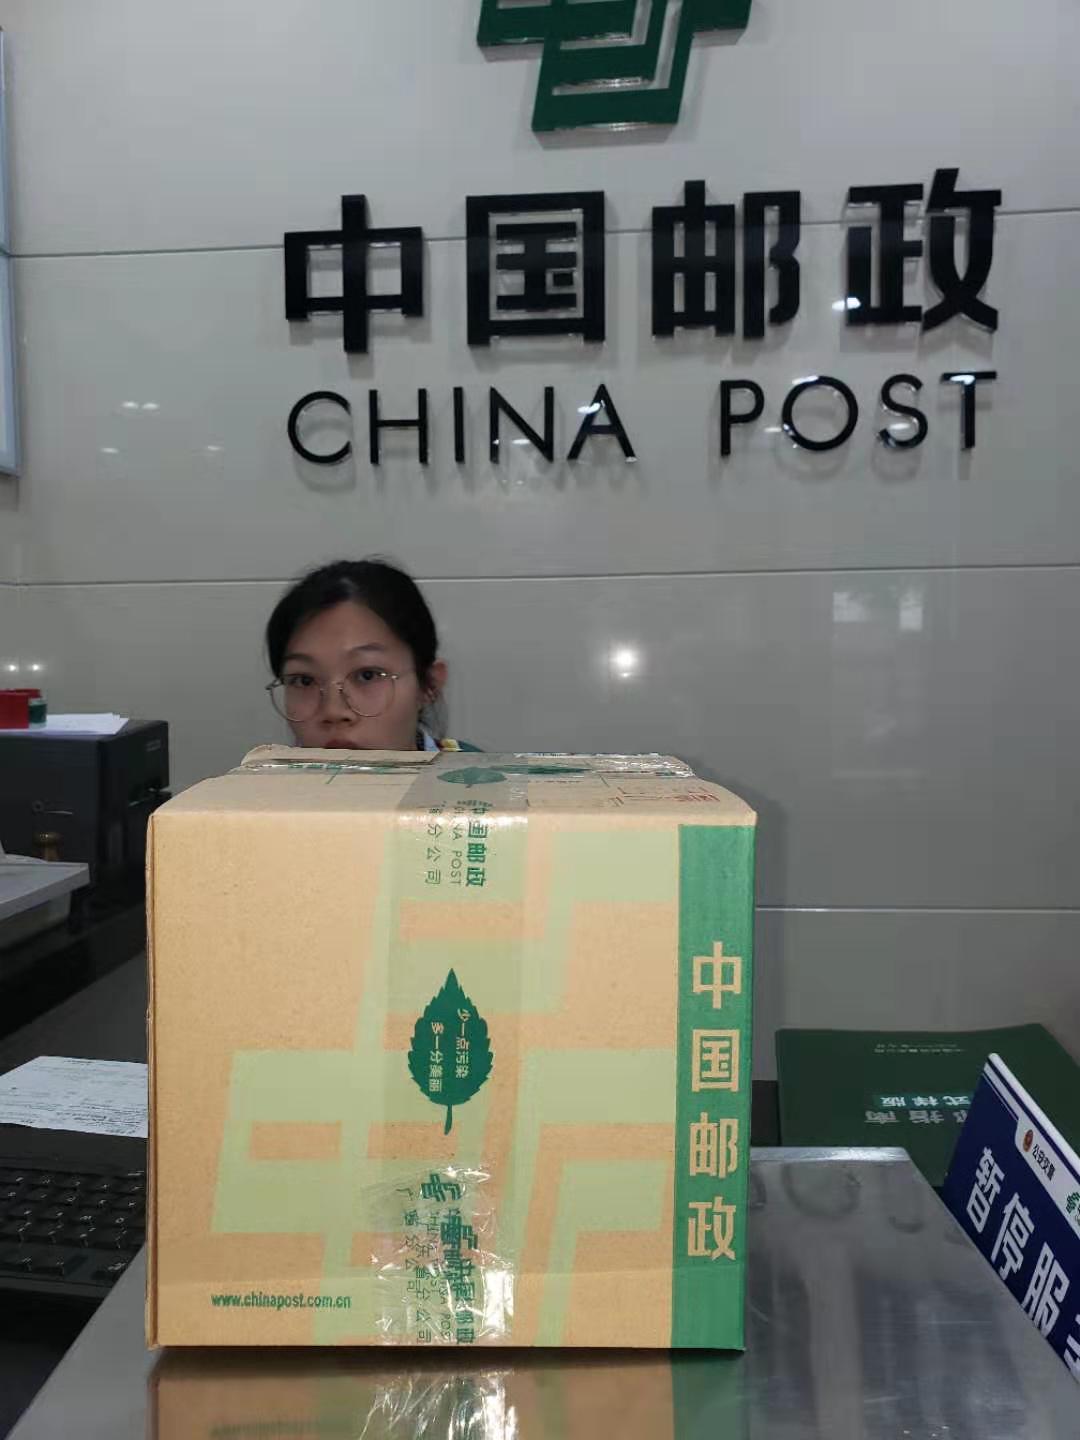 Chinese post. Sending condoms - My, China, Chinese, mail, Condoms, Friday, Pick-up headphones, Living abroad, Longpost